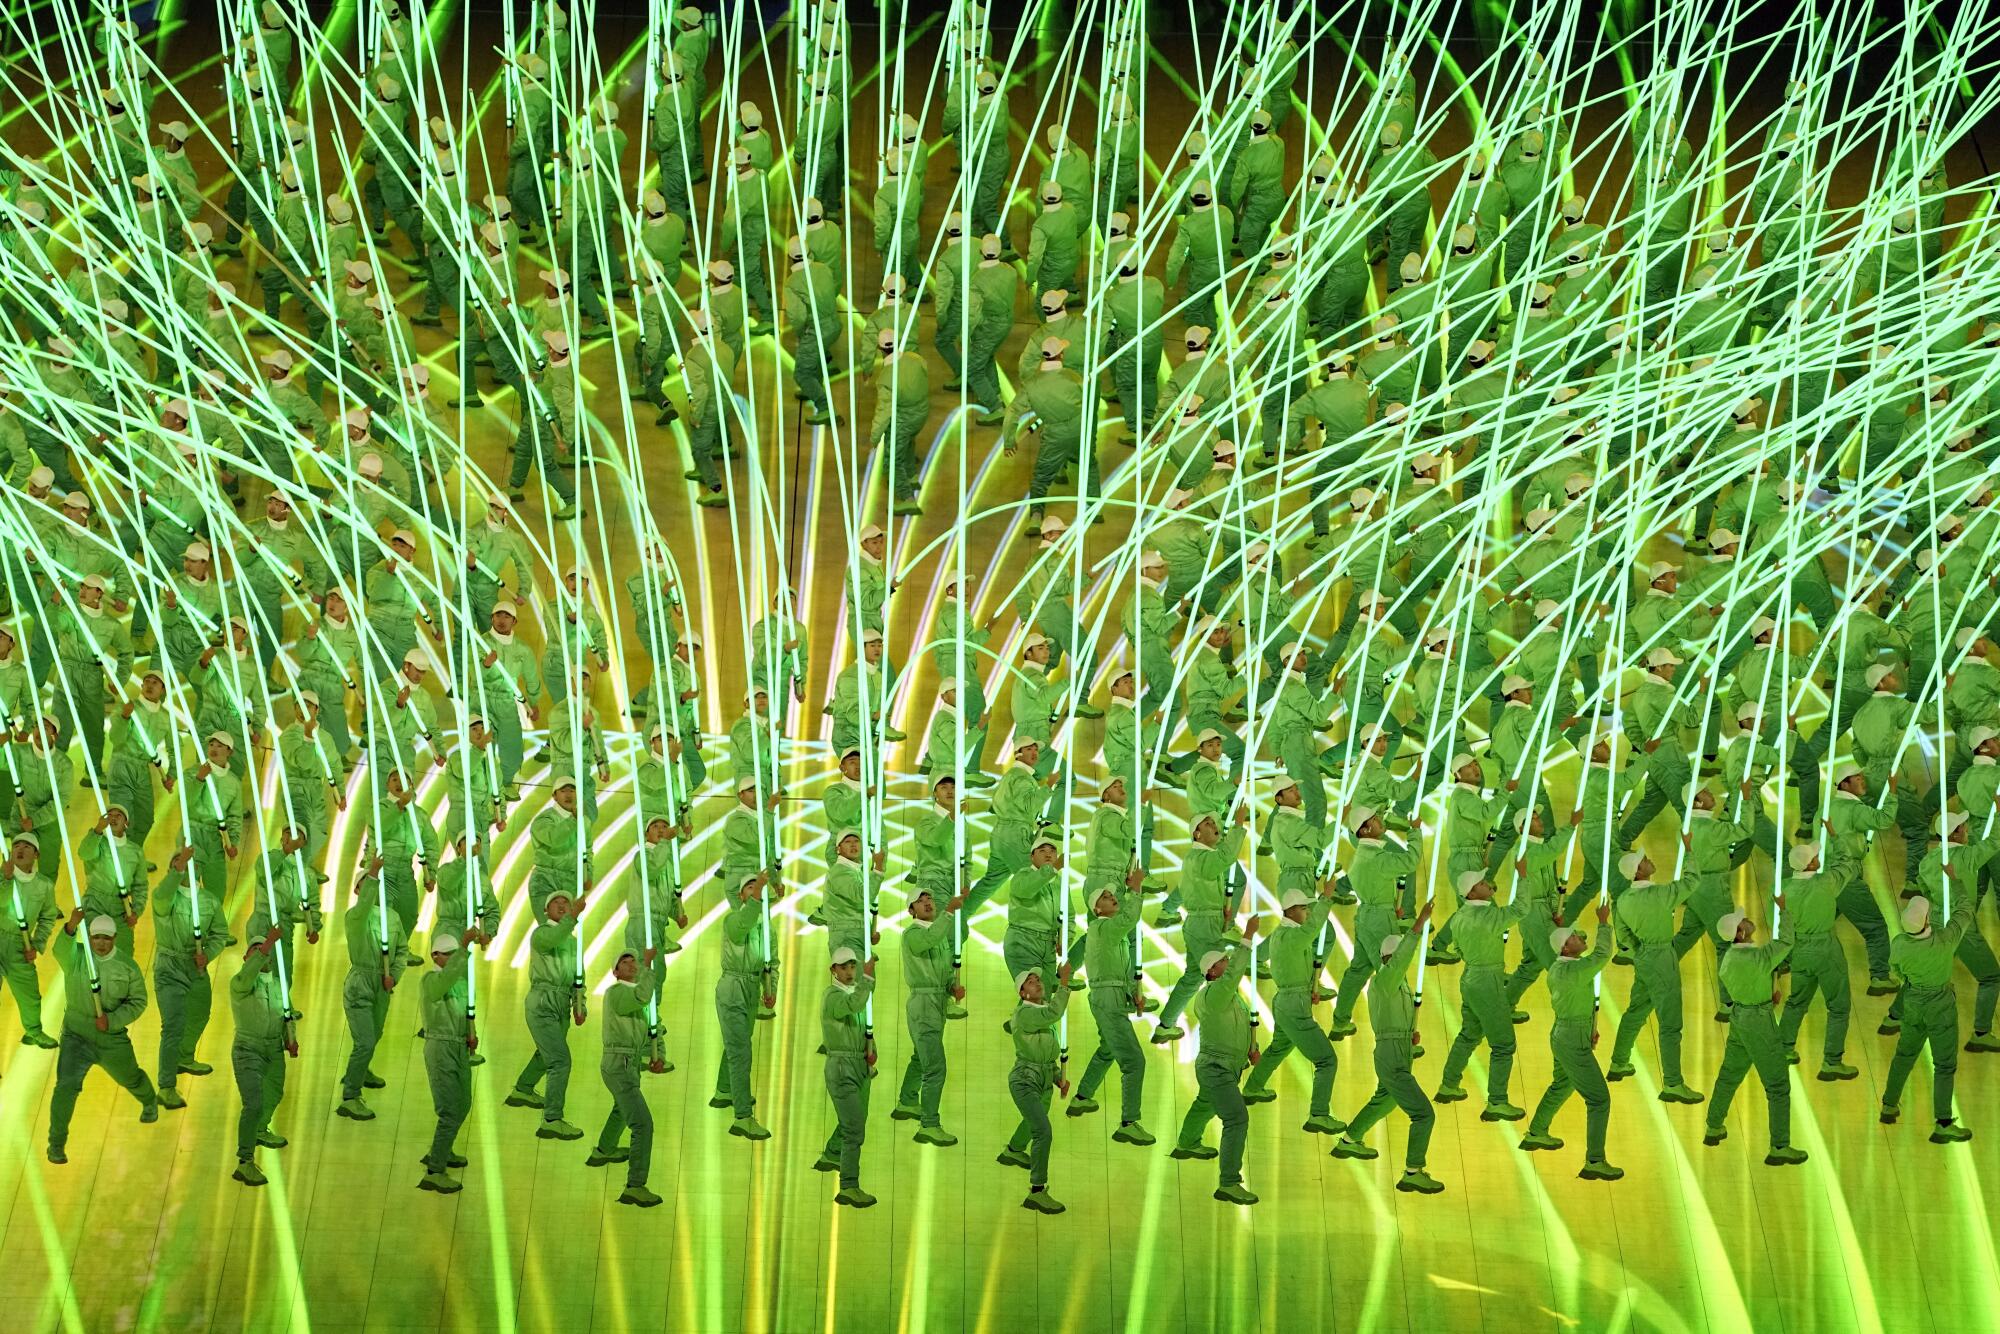 Dancers hold giant LED sticks meant to look like spring willows during the opening ceremony.